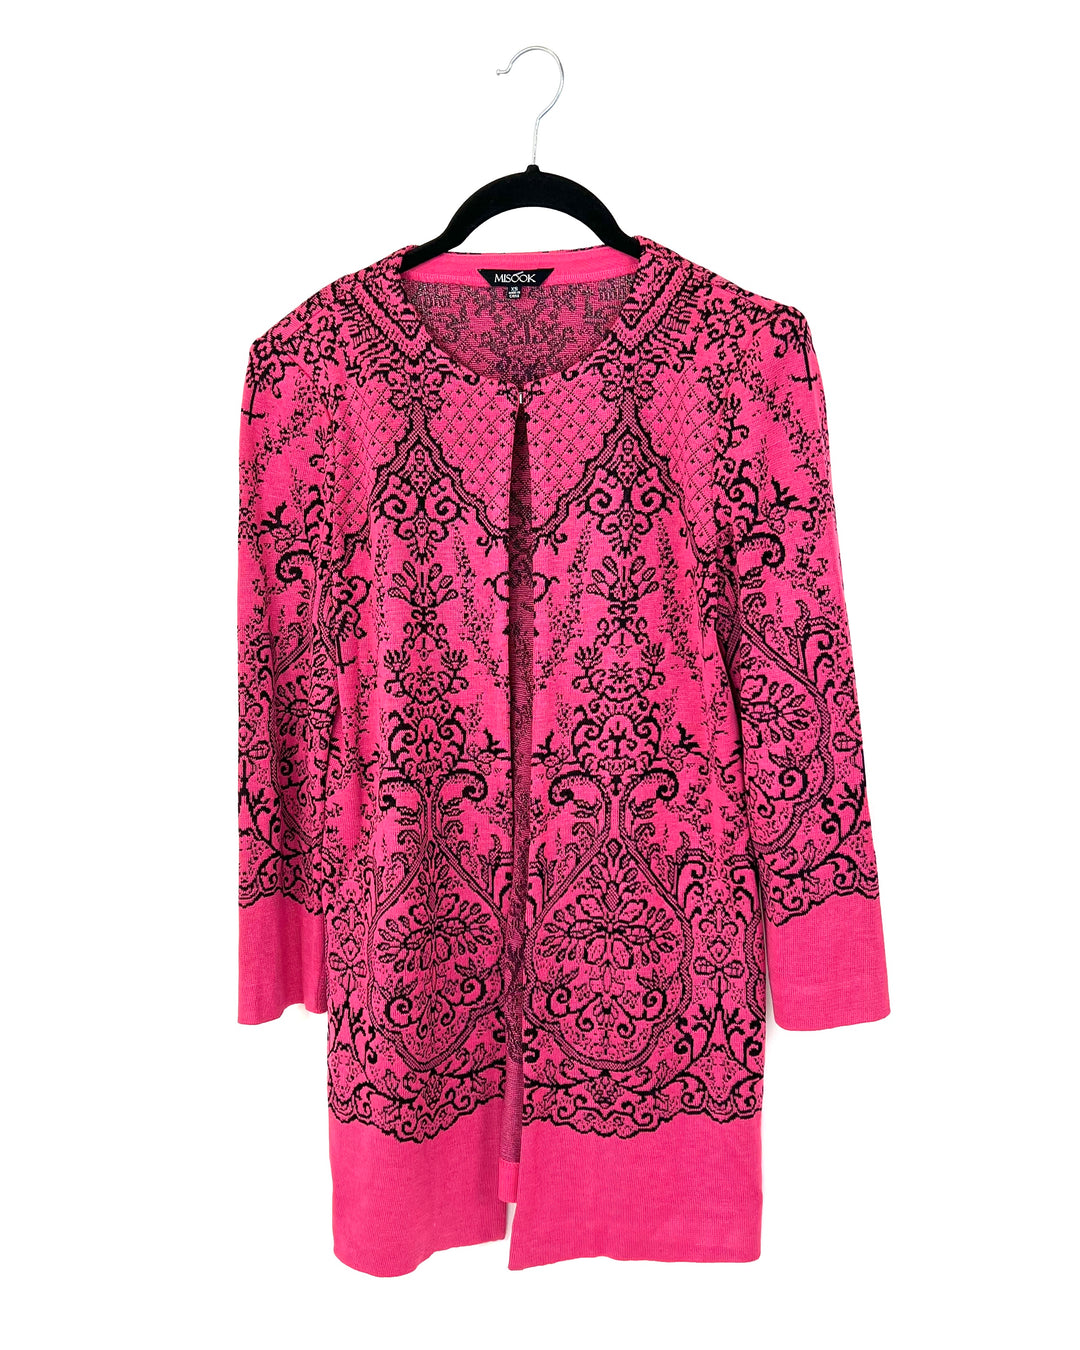 Pink And Black Paisley Print Cardigan - Size 2-4